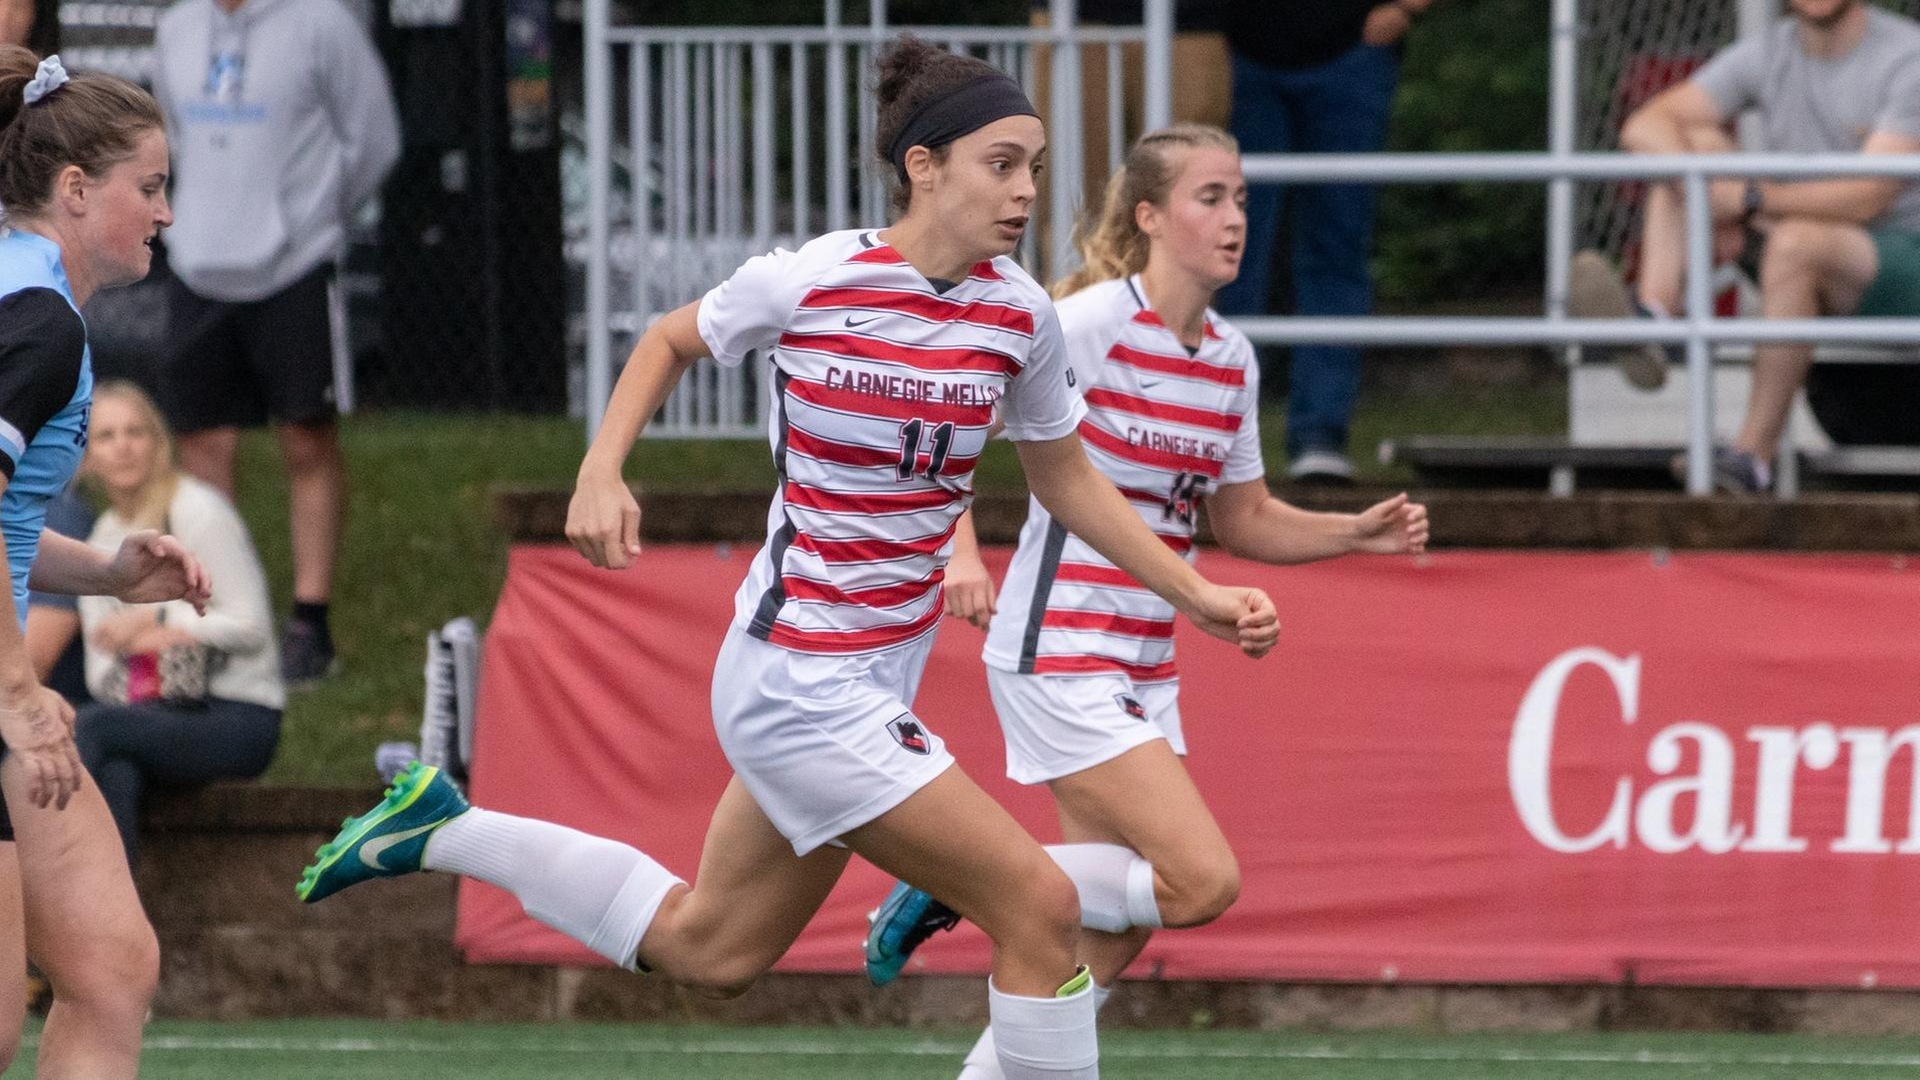 women's soccer player wearing white and red striped shirt and white shorts running with ball at foot and teammate to the left with a defender chasing